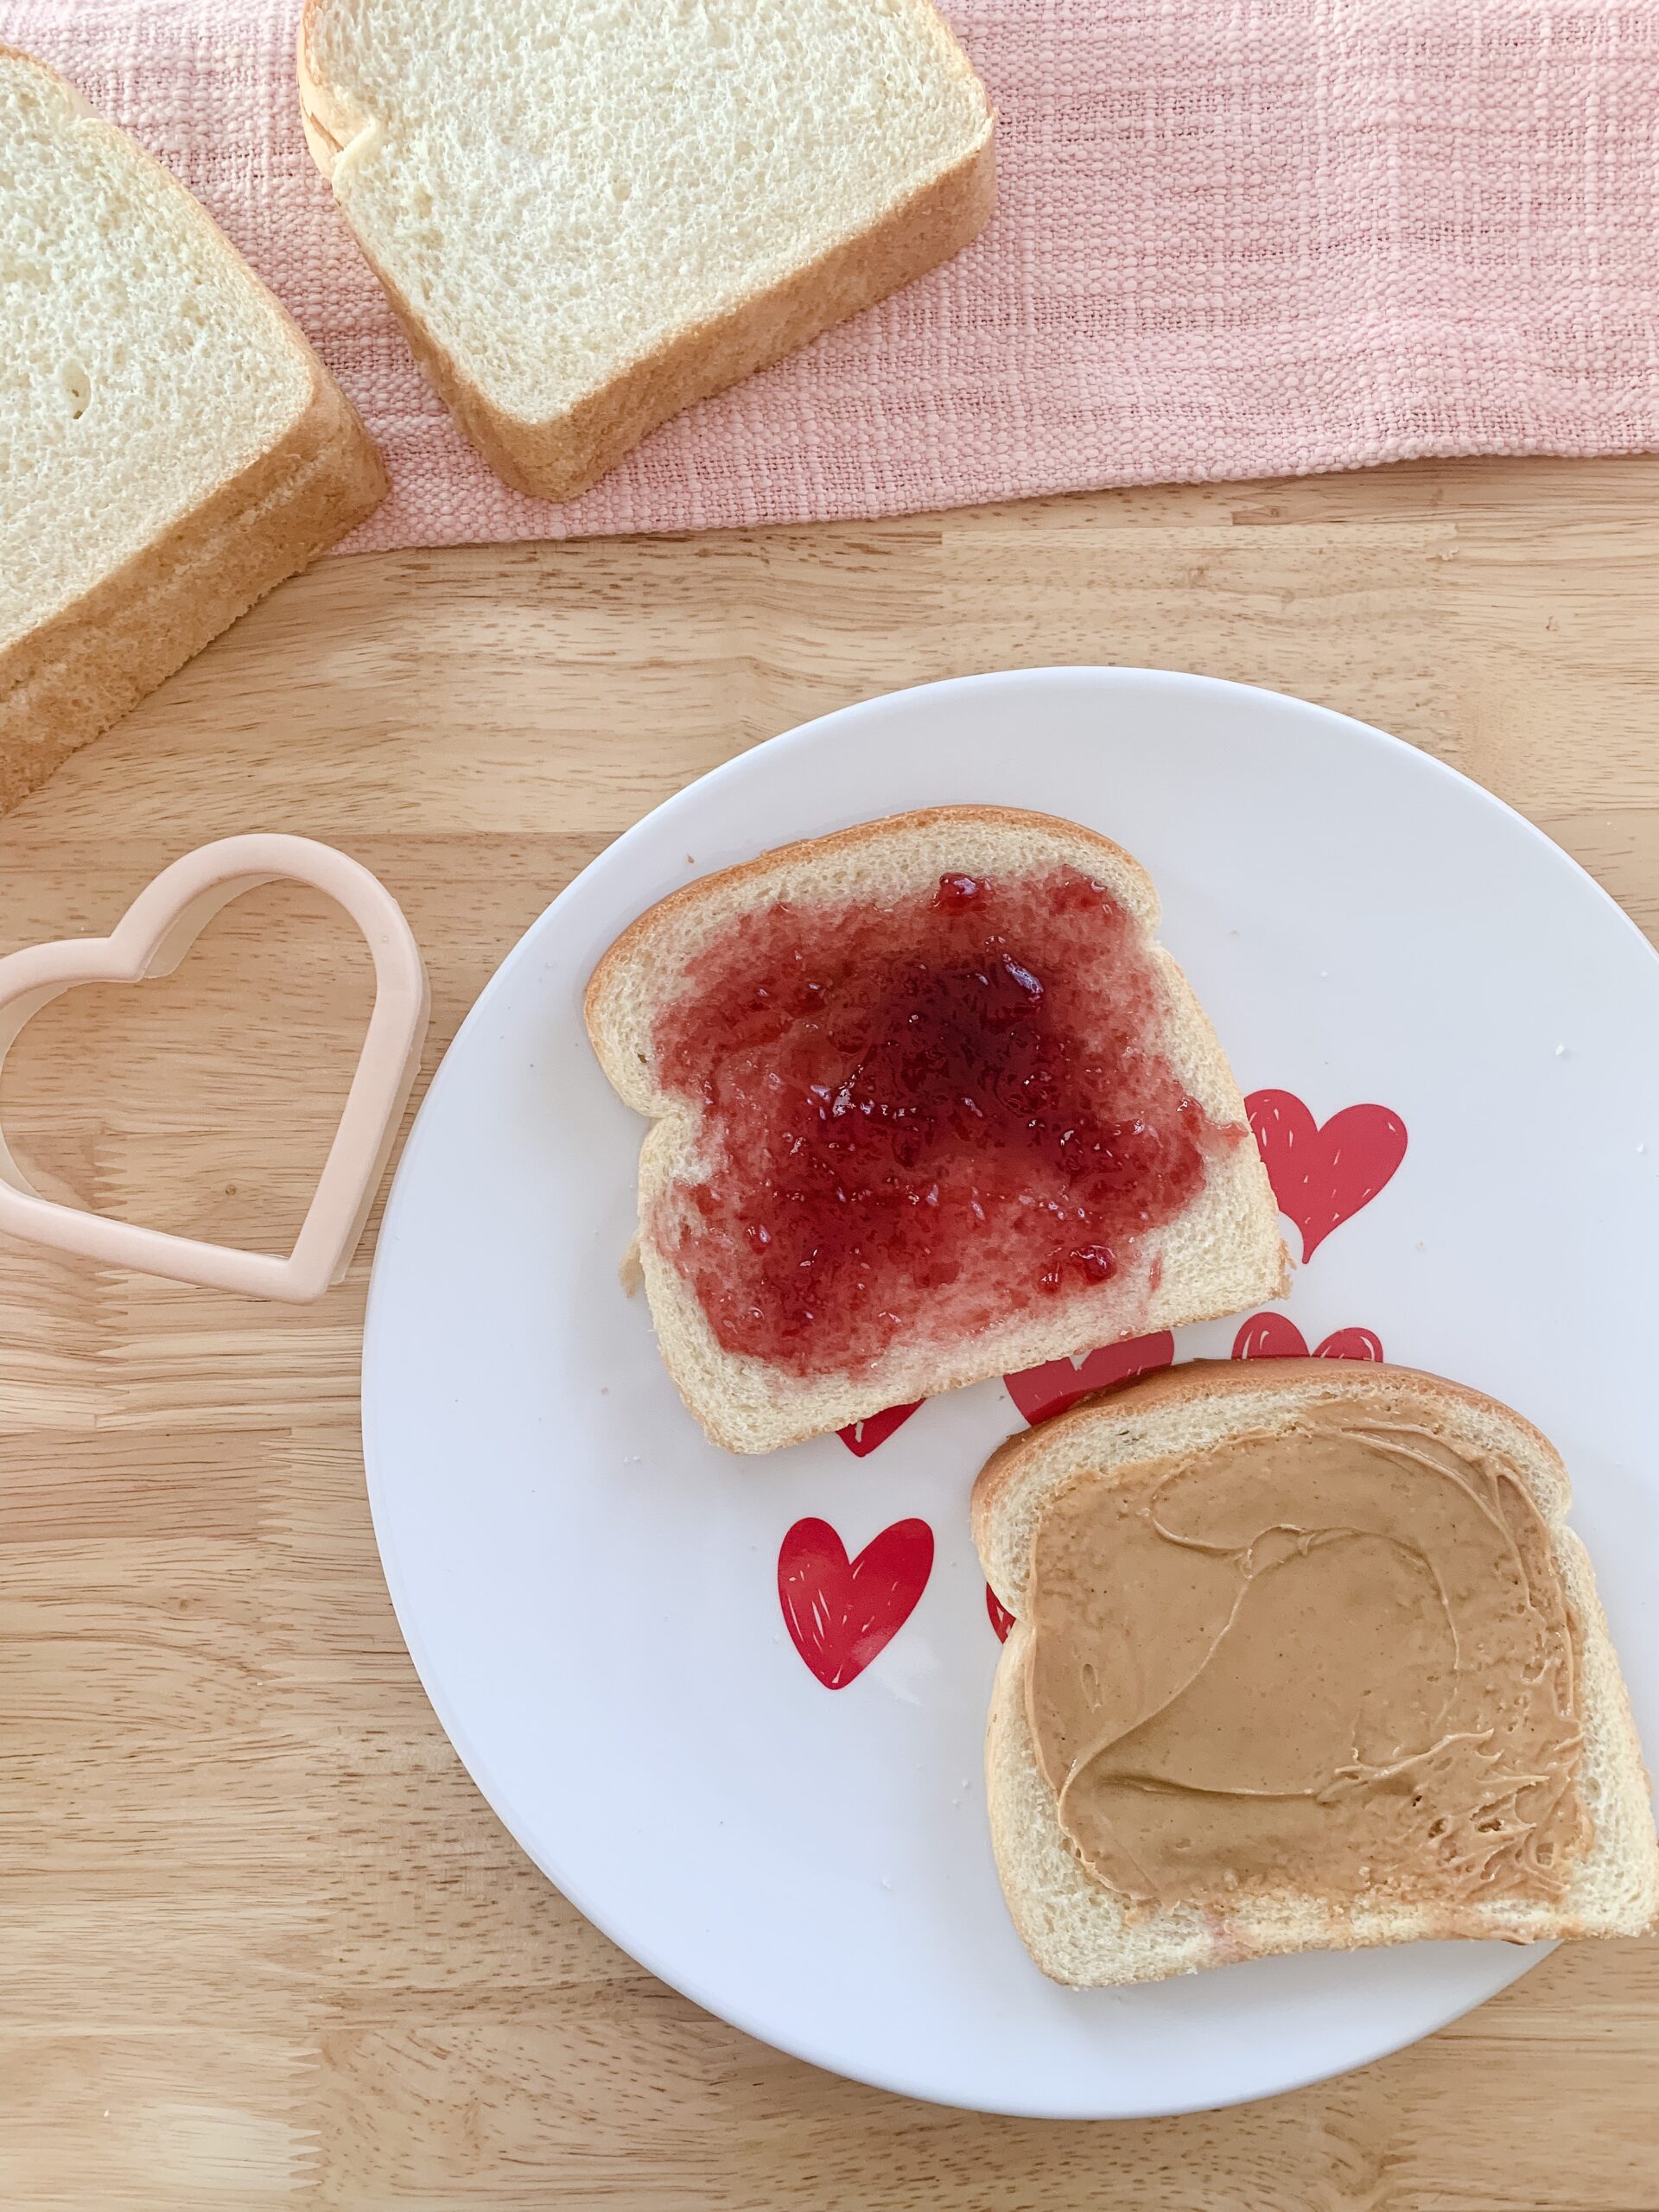 Valentine's Peanut Butter and Jelly